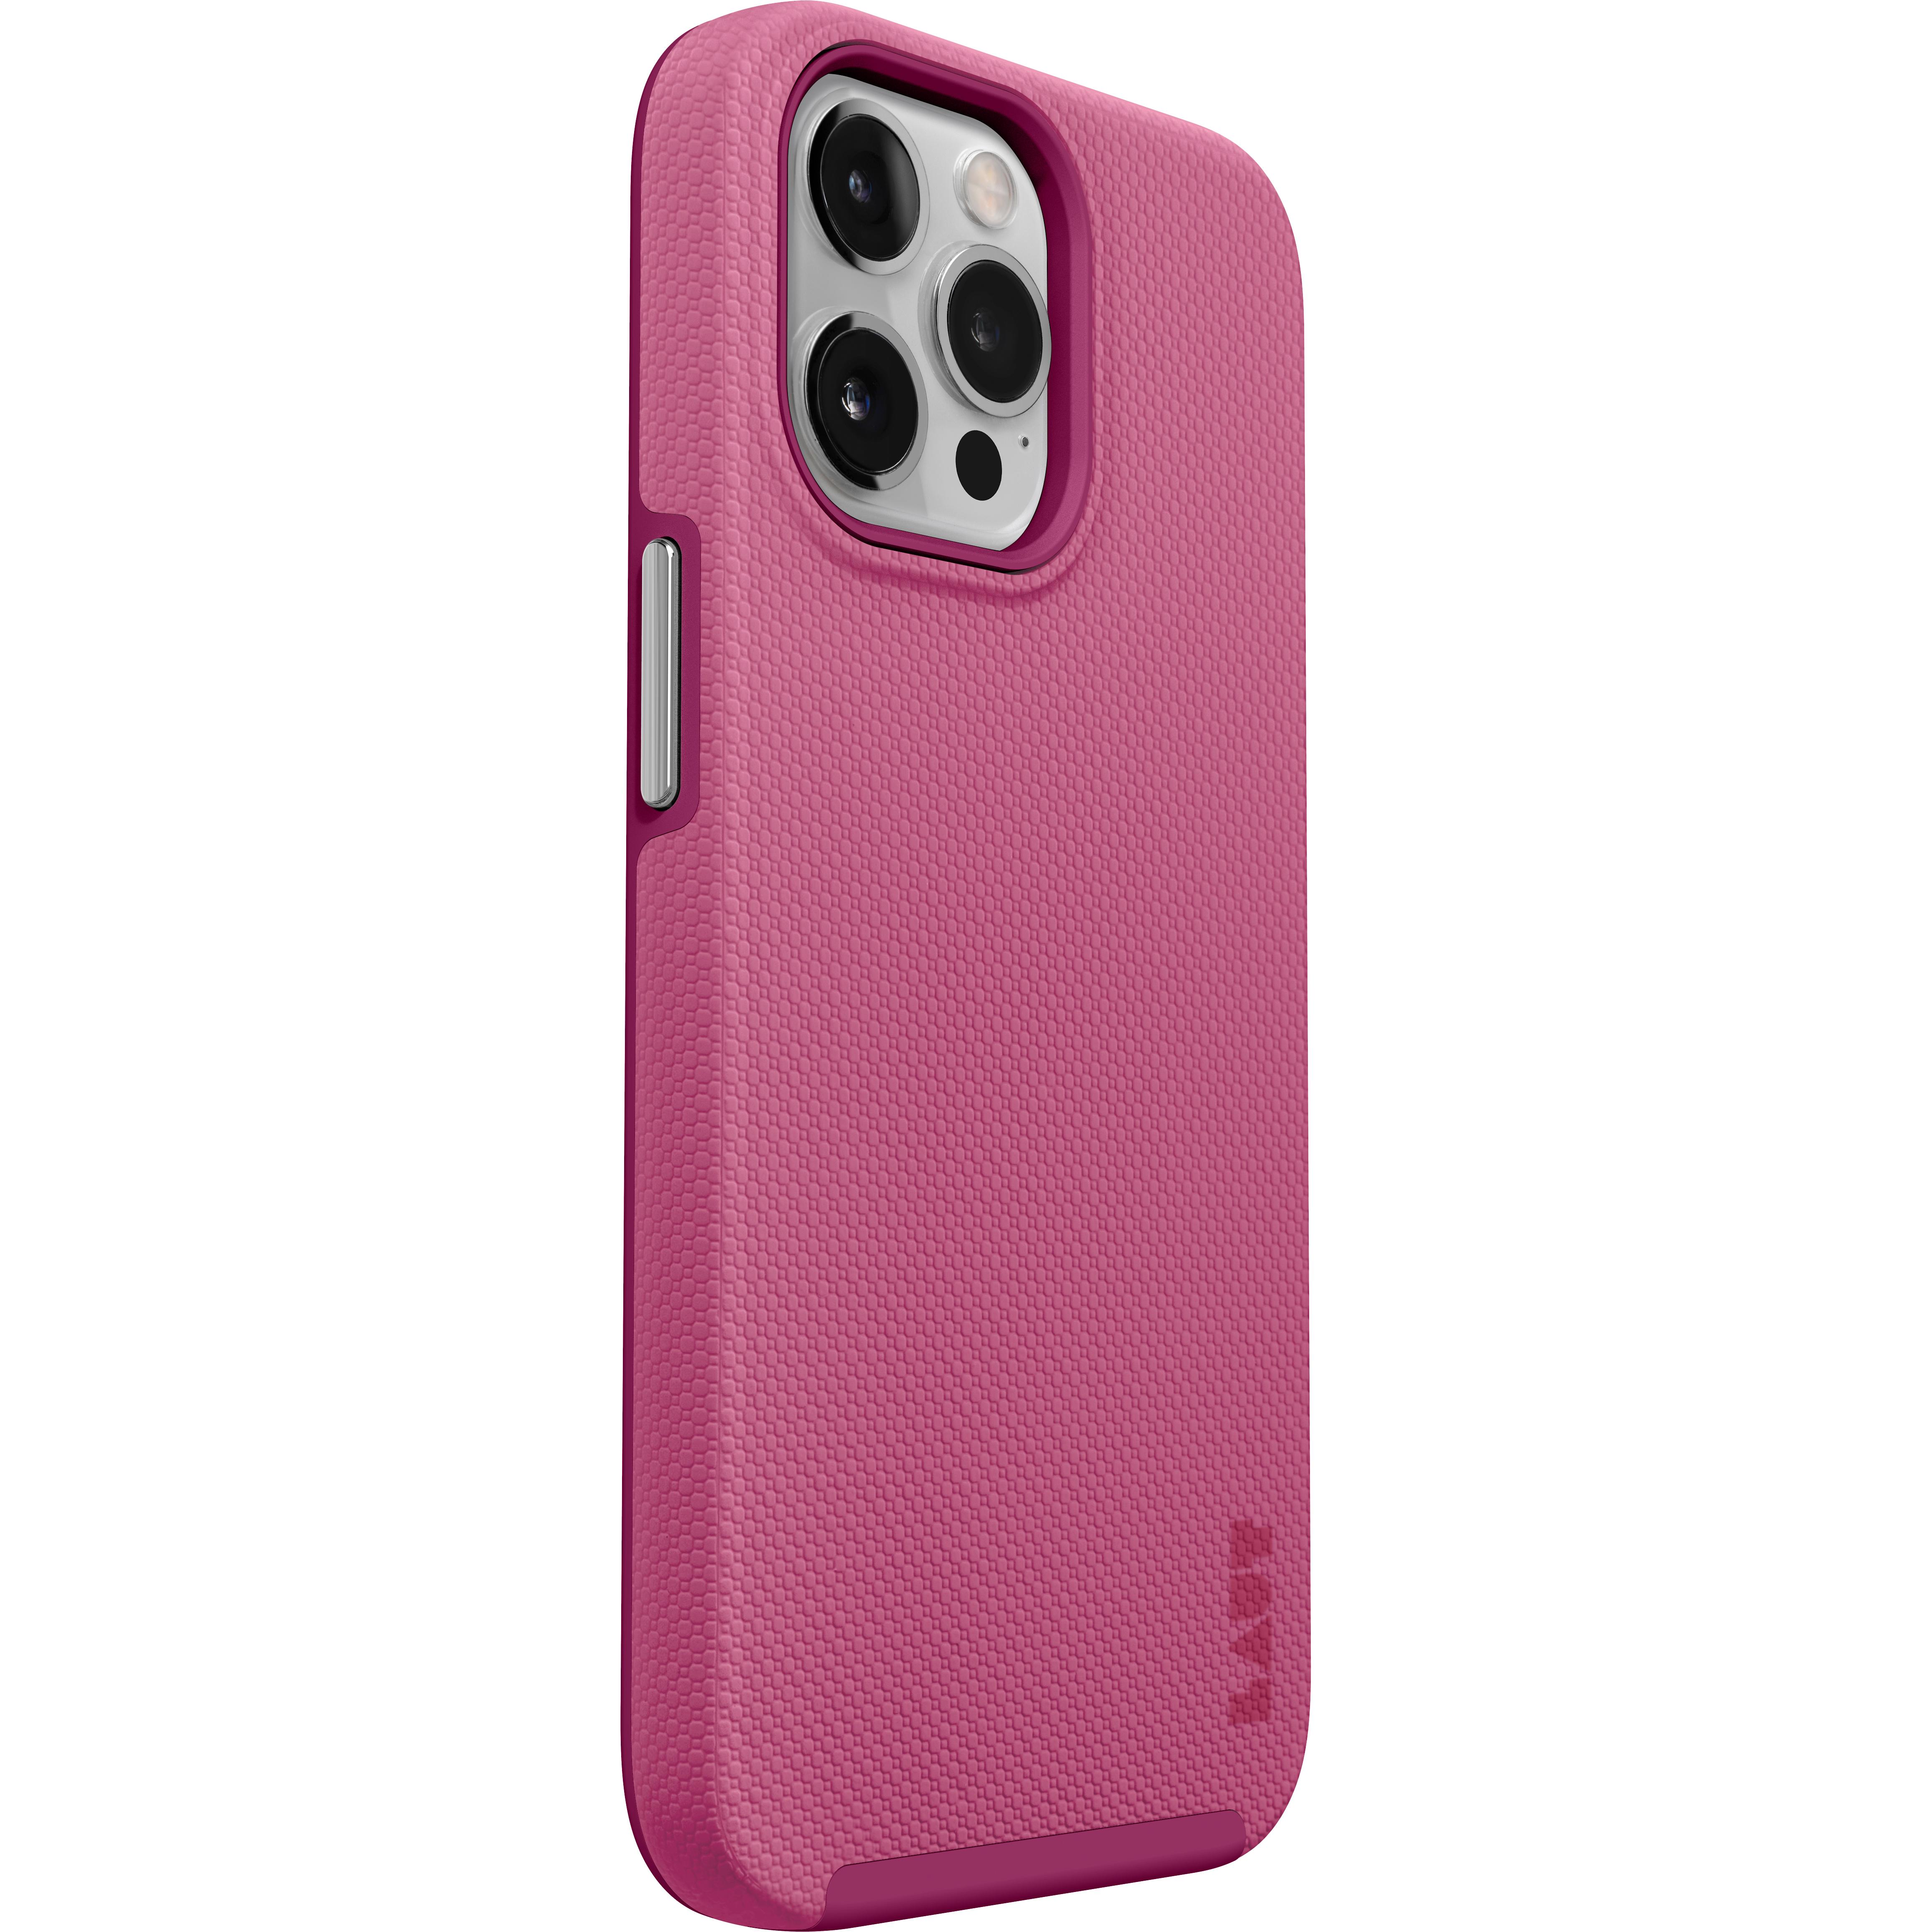 LAUT Shield, APPLE, MAX, PRO PINK2 14 Backcover, IPHONE